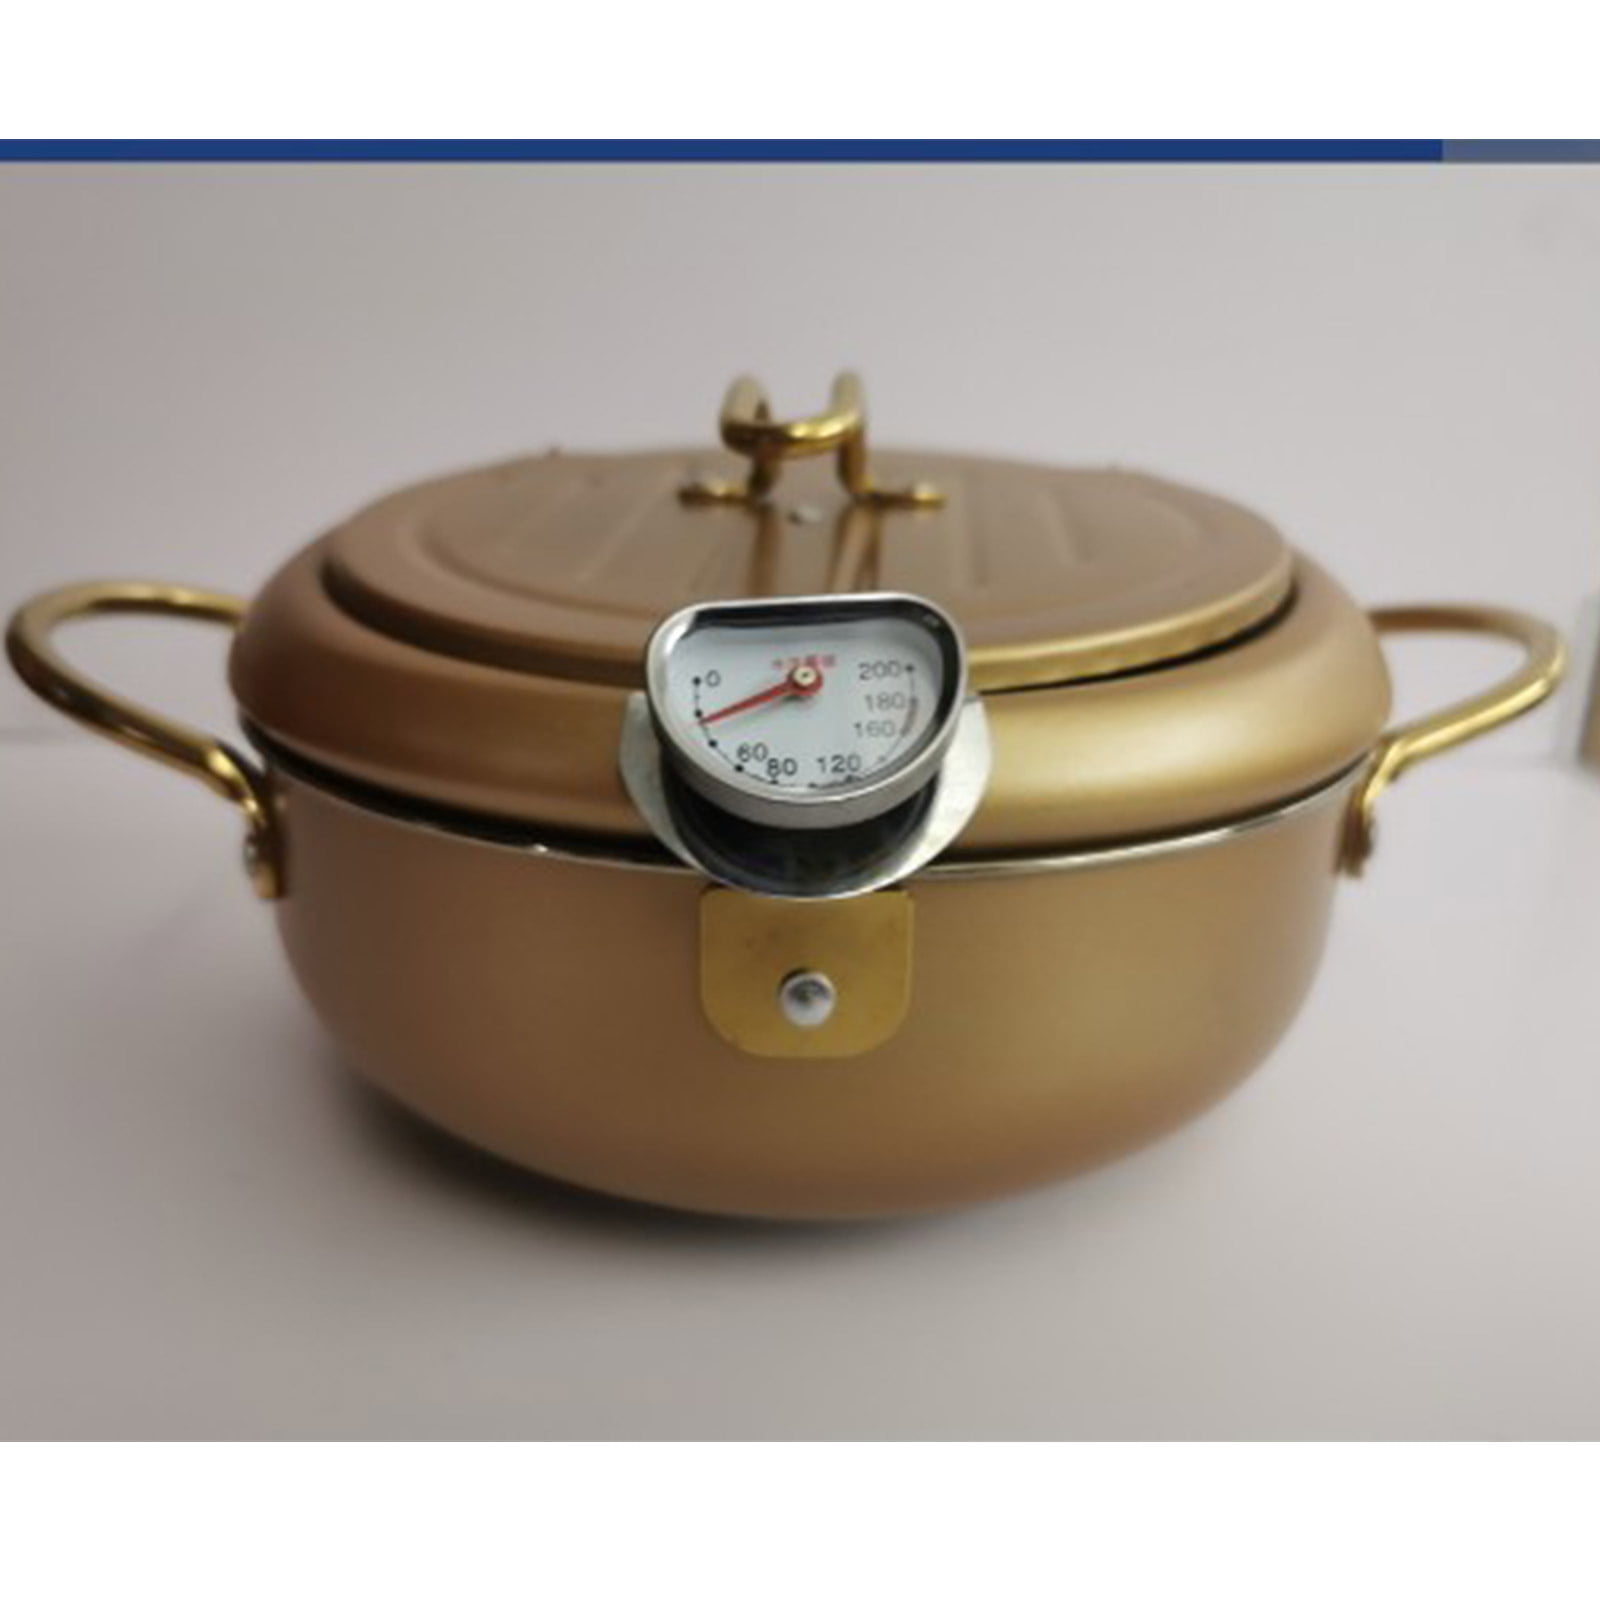 Details about   Iron Deep Fryer with Lid and Oil Drain Rack Thermometer